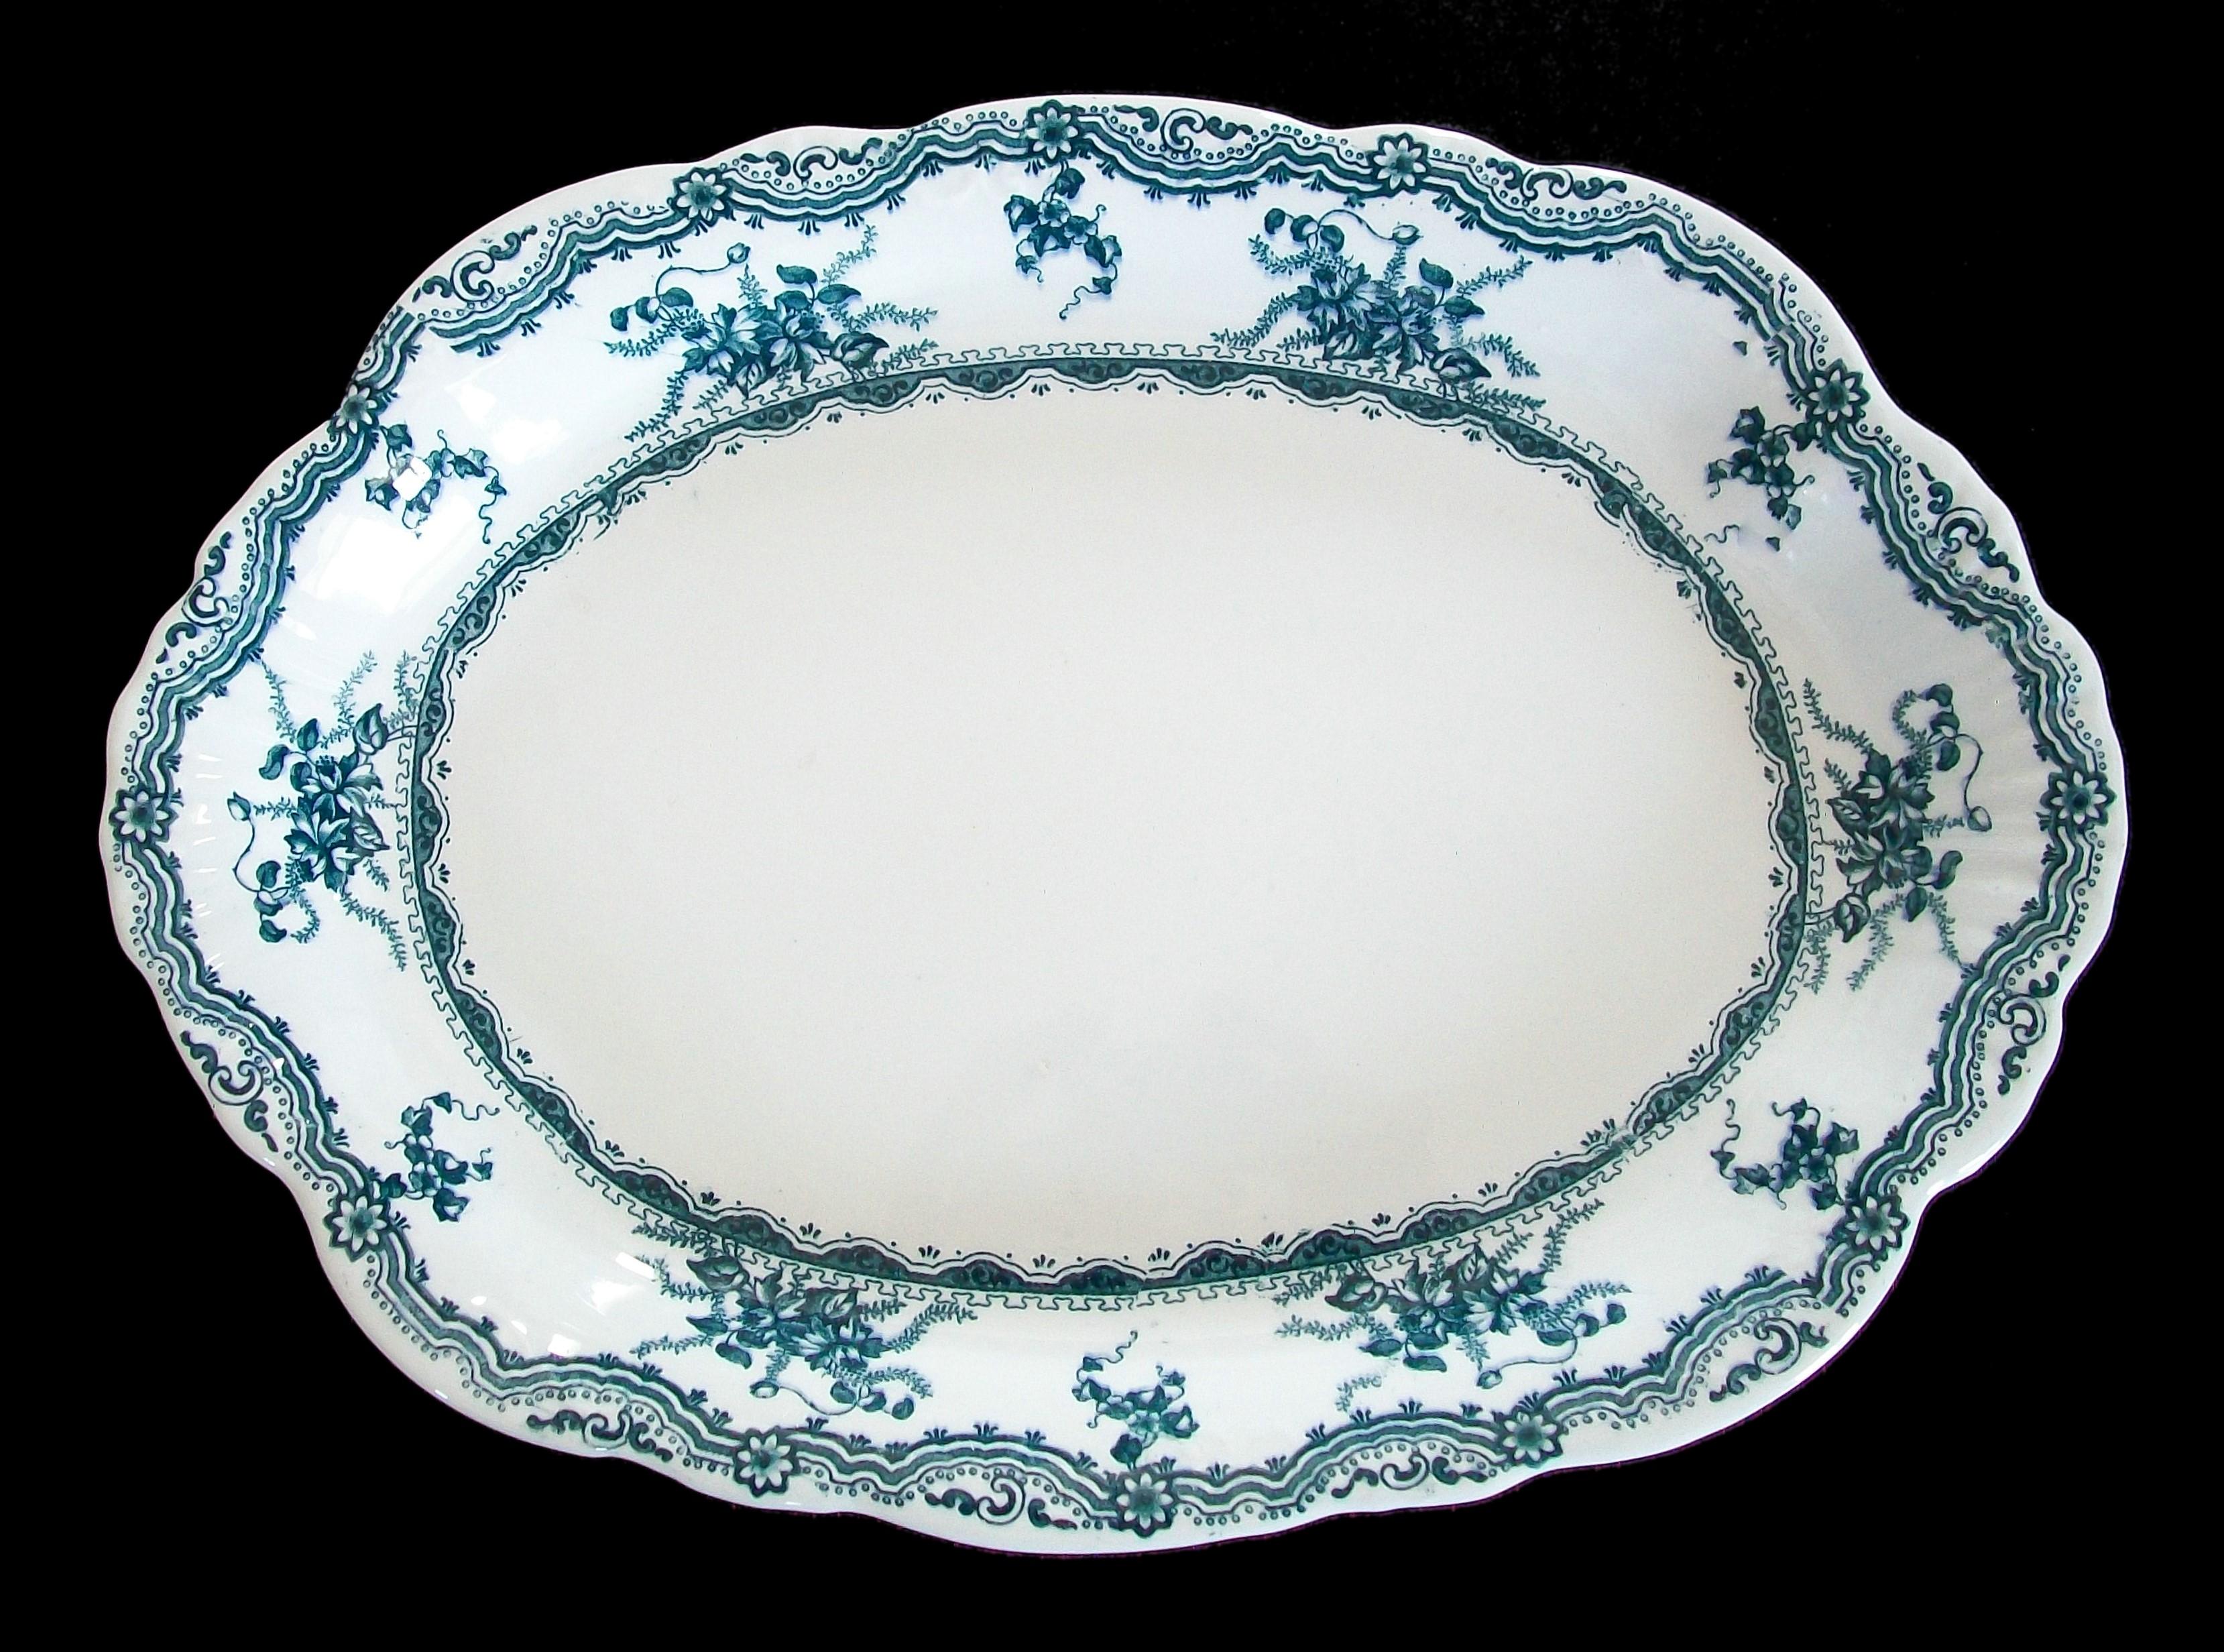 BAKER & CO. LTD. - Antique ceramic serving platter - large size - transfer decorated in blue/green on a cream ground - undecorated center - signed on the base - United Kingdom (Staffordshire) - circa 1893.

Excellent/near mint antique condition -